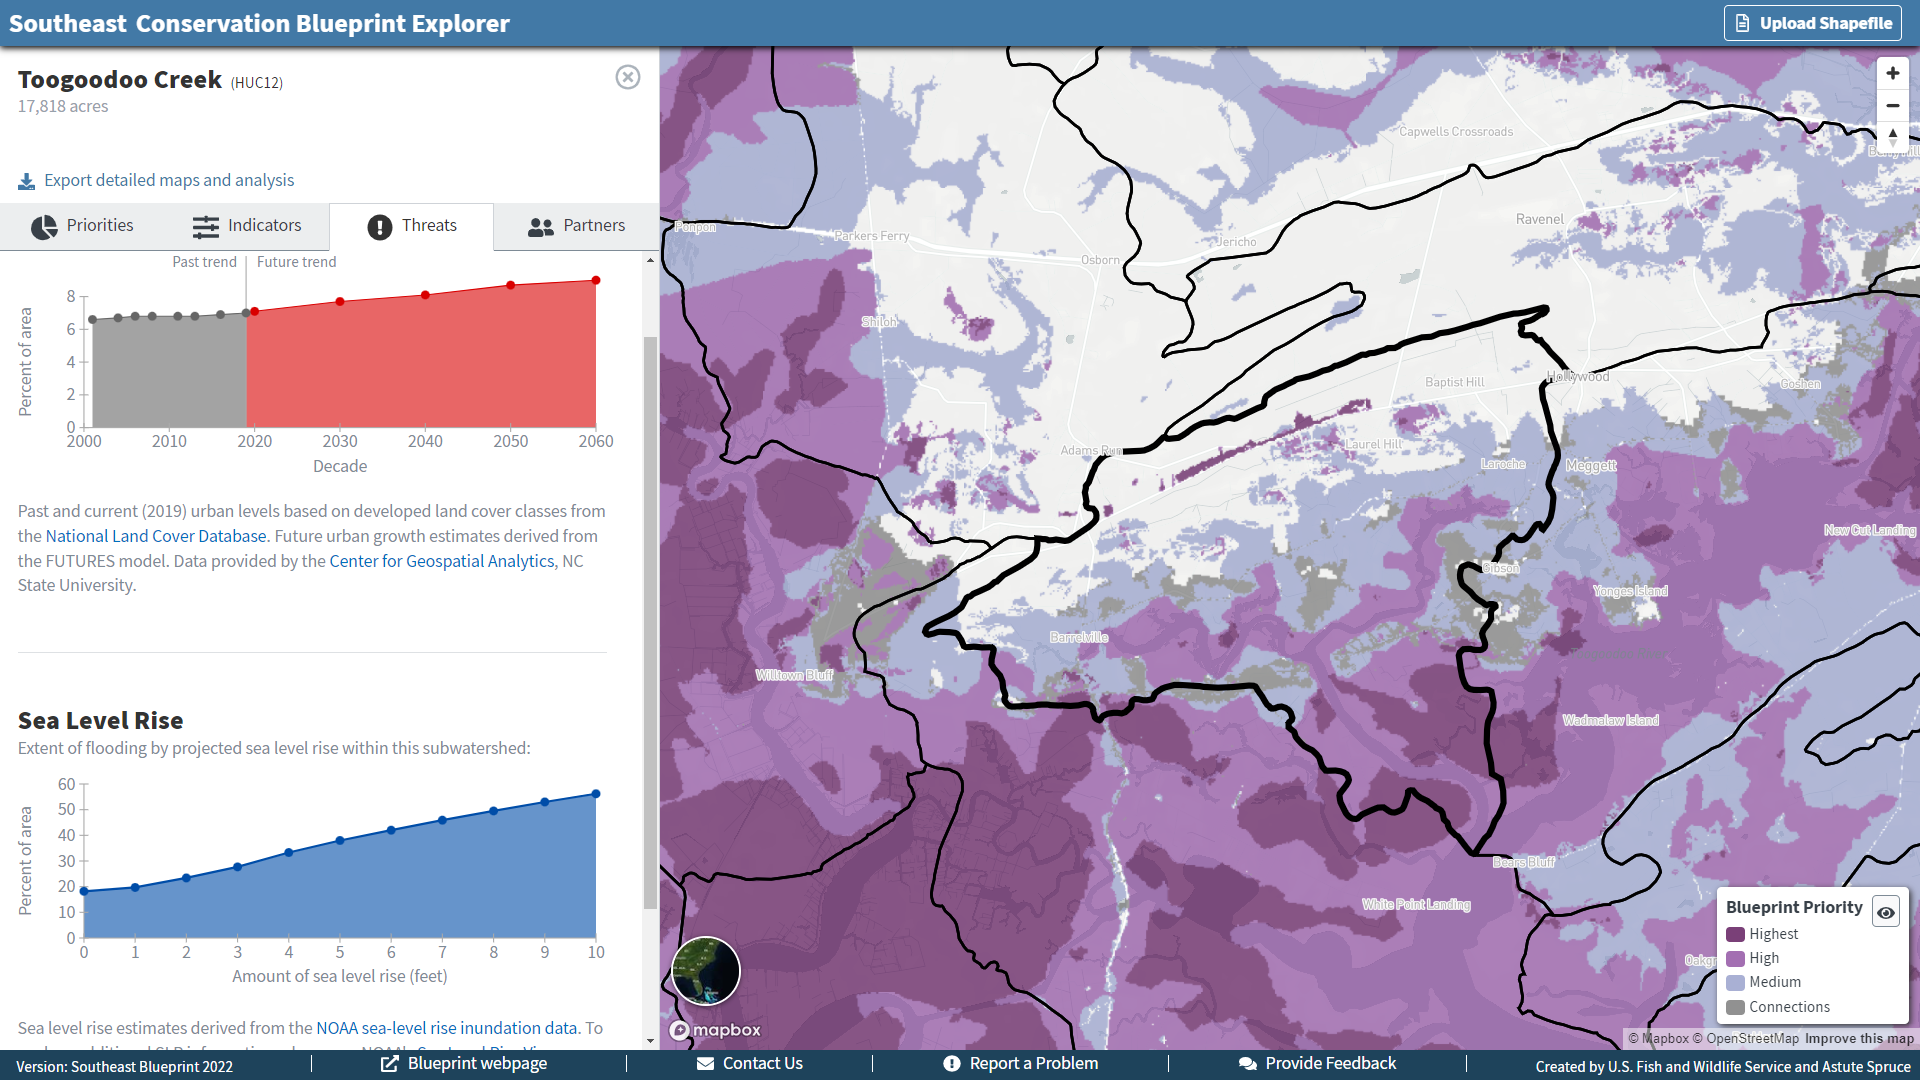 Screenshot of the viewer showing upwards trends in the percent of a subwatershed impacted by SLR and urbanization over time